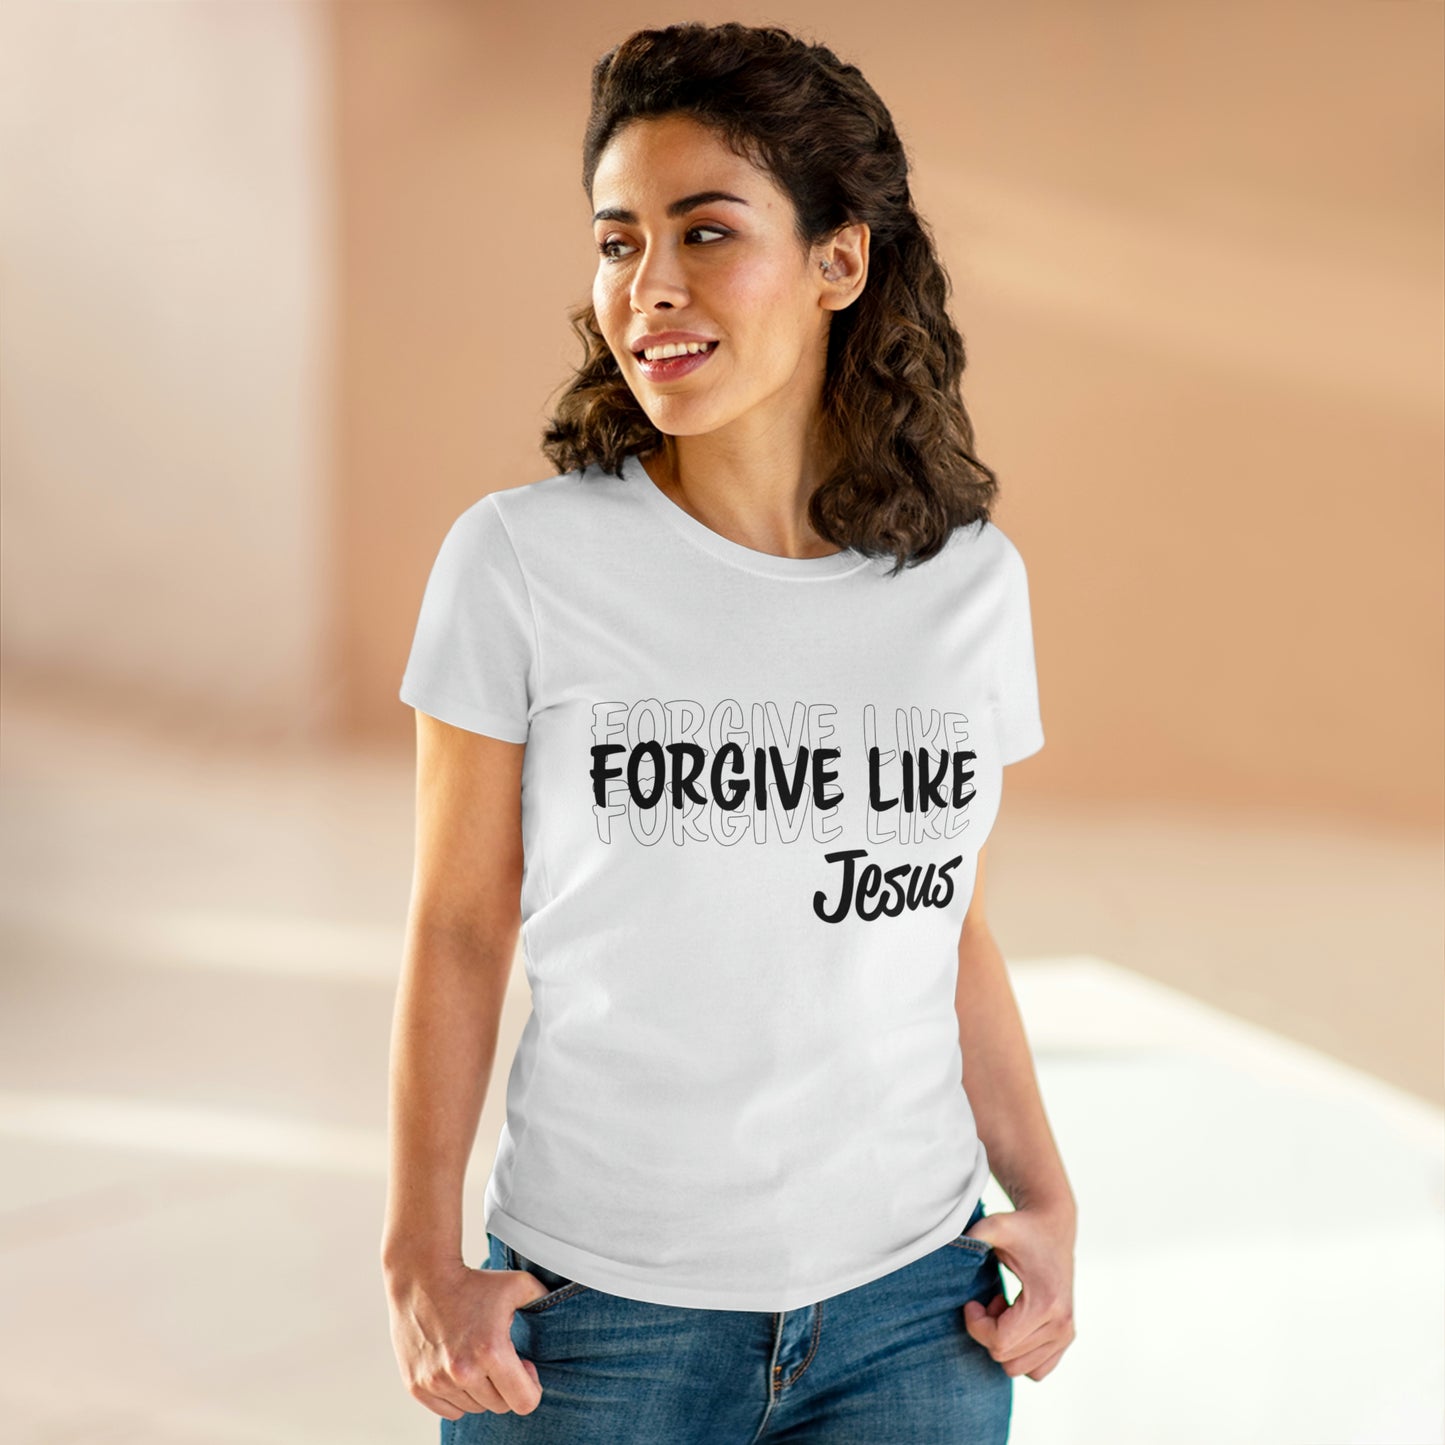 Ladies Bible Verse Shirt, Relaxed Fit Short Sleeve T-Shirt, Ladies Crewneck, Woman's Cotton Teee